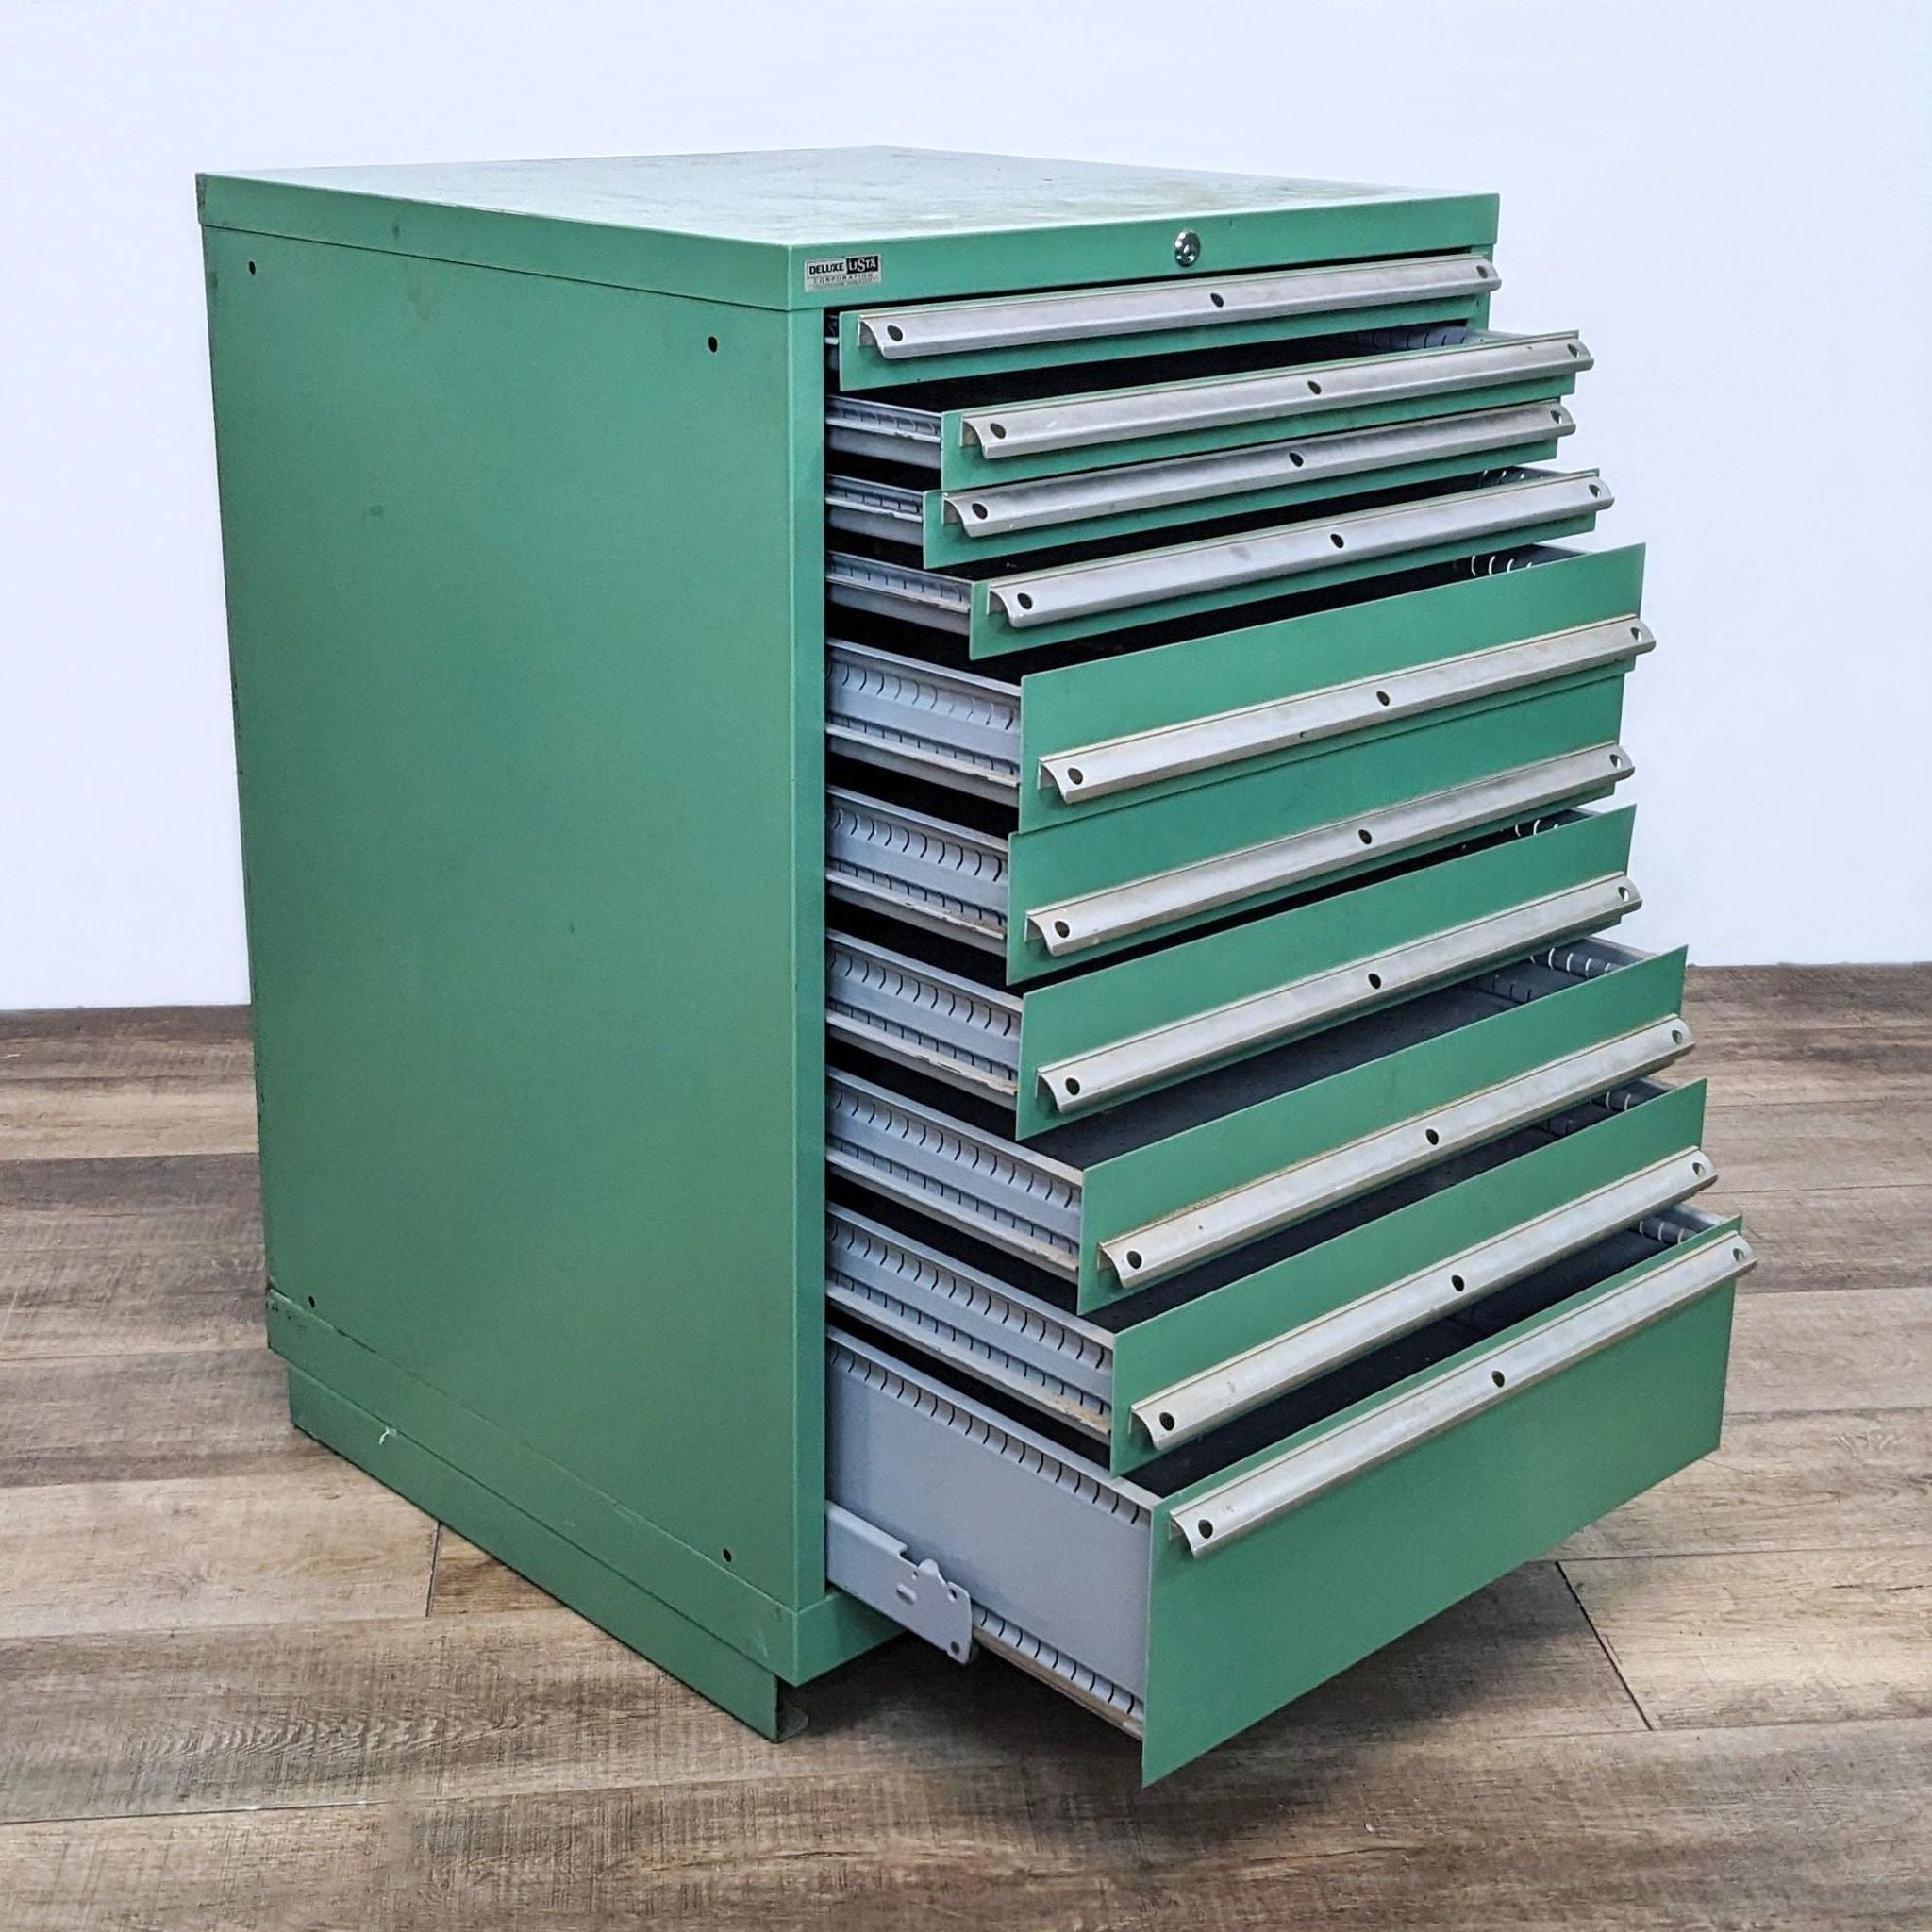 Alt text 2: Open drawers of a green Lista tool cabinet showing metal interiors, designed for easy-access tool storage and organization.